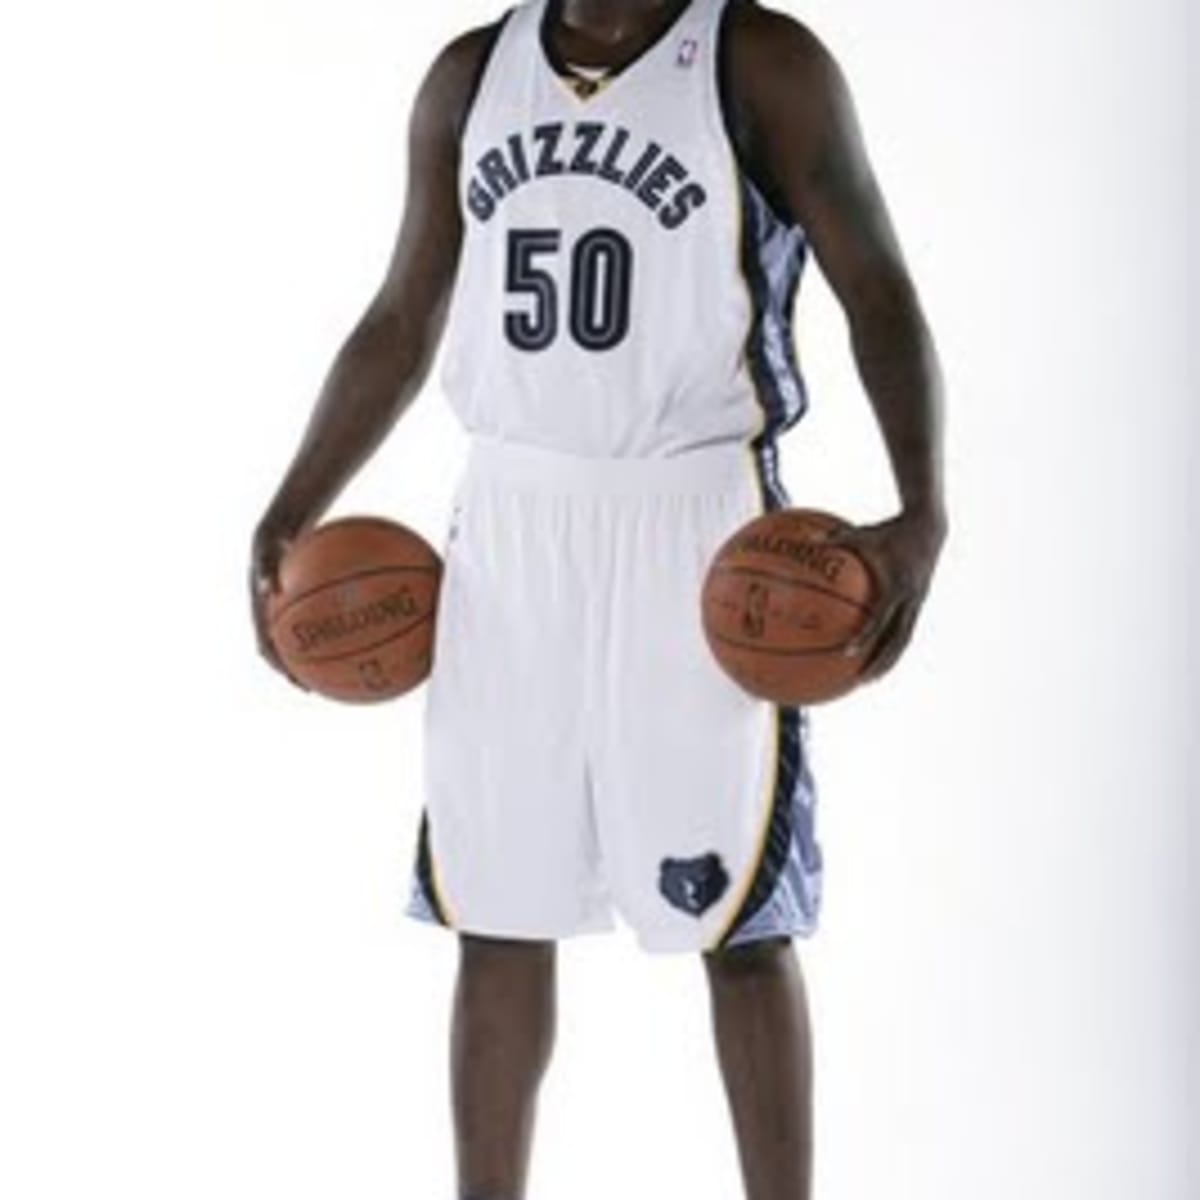 MHS to host special honor for Zach Randolph (7/21)